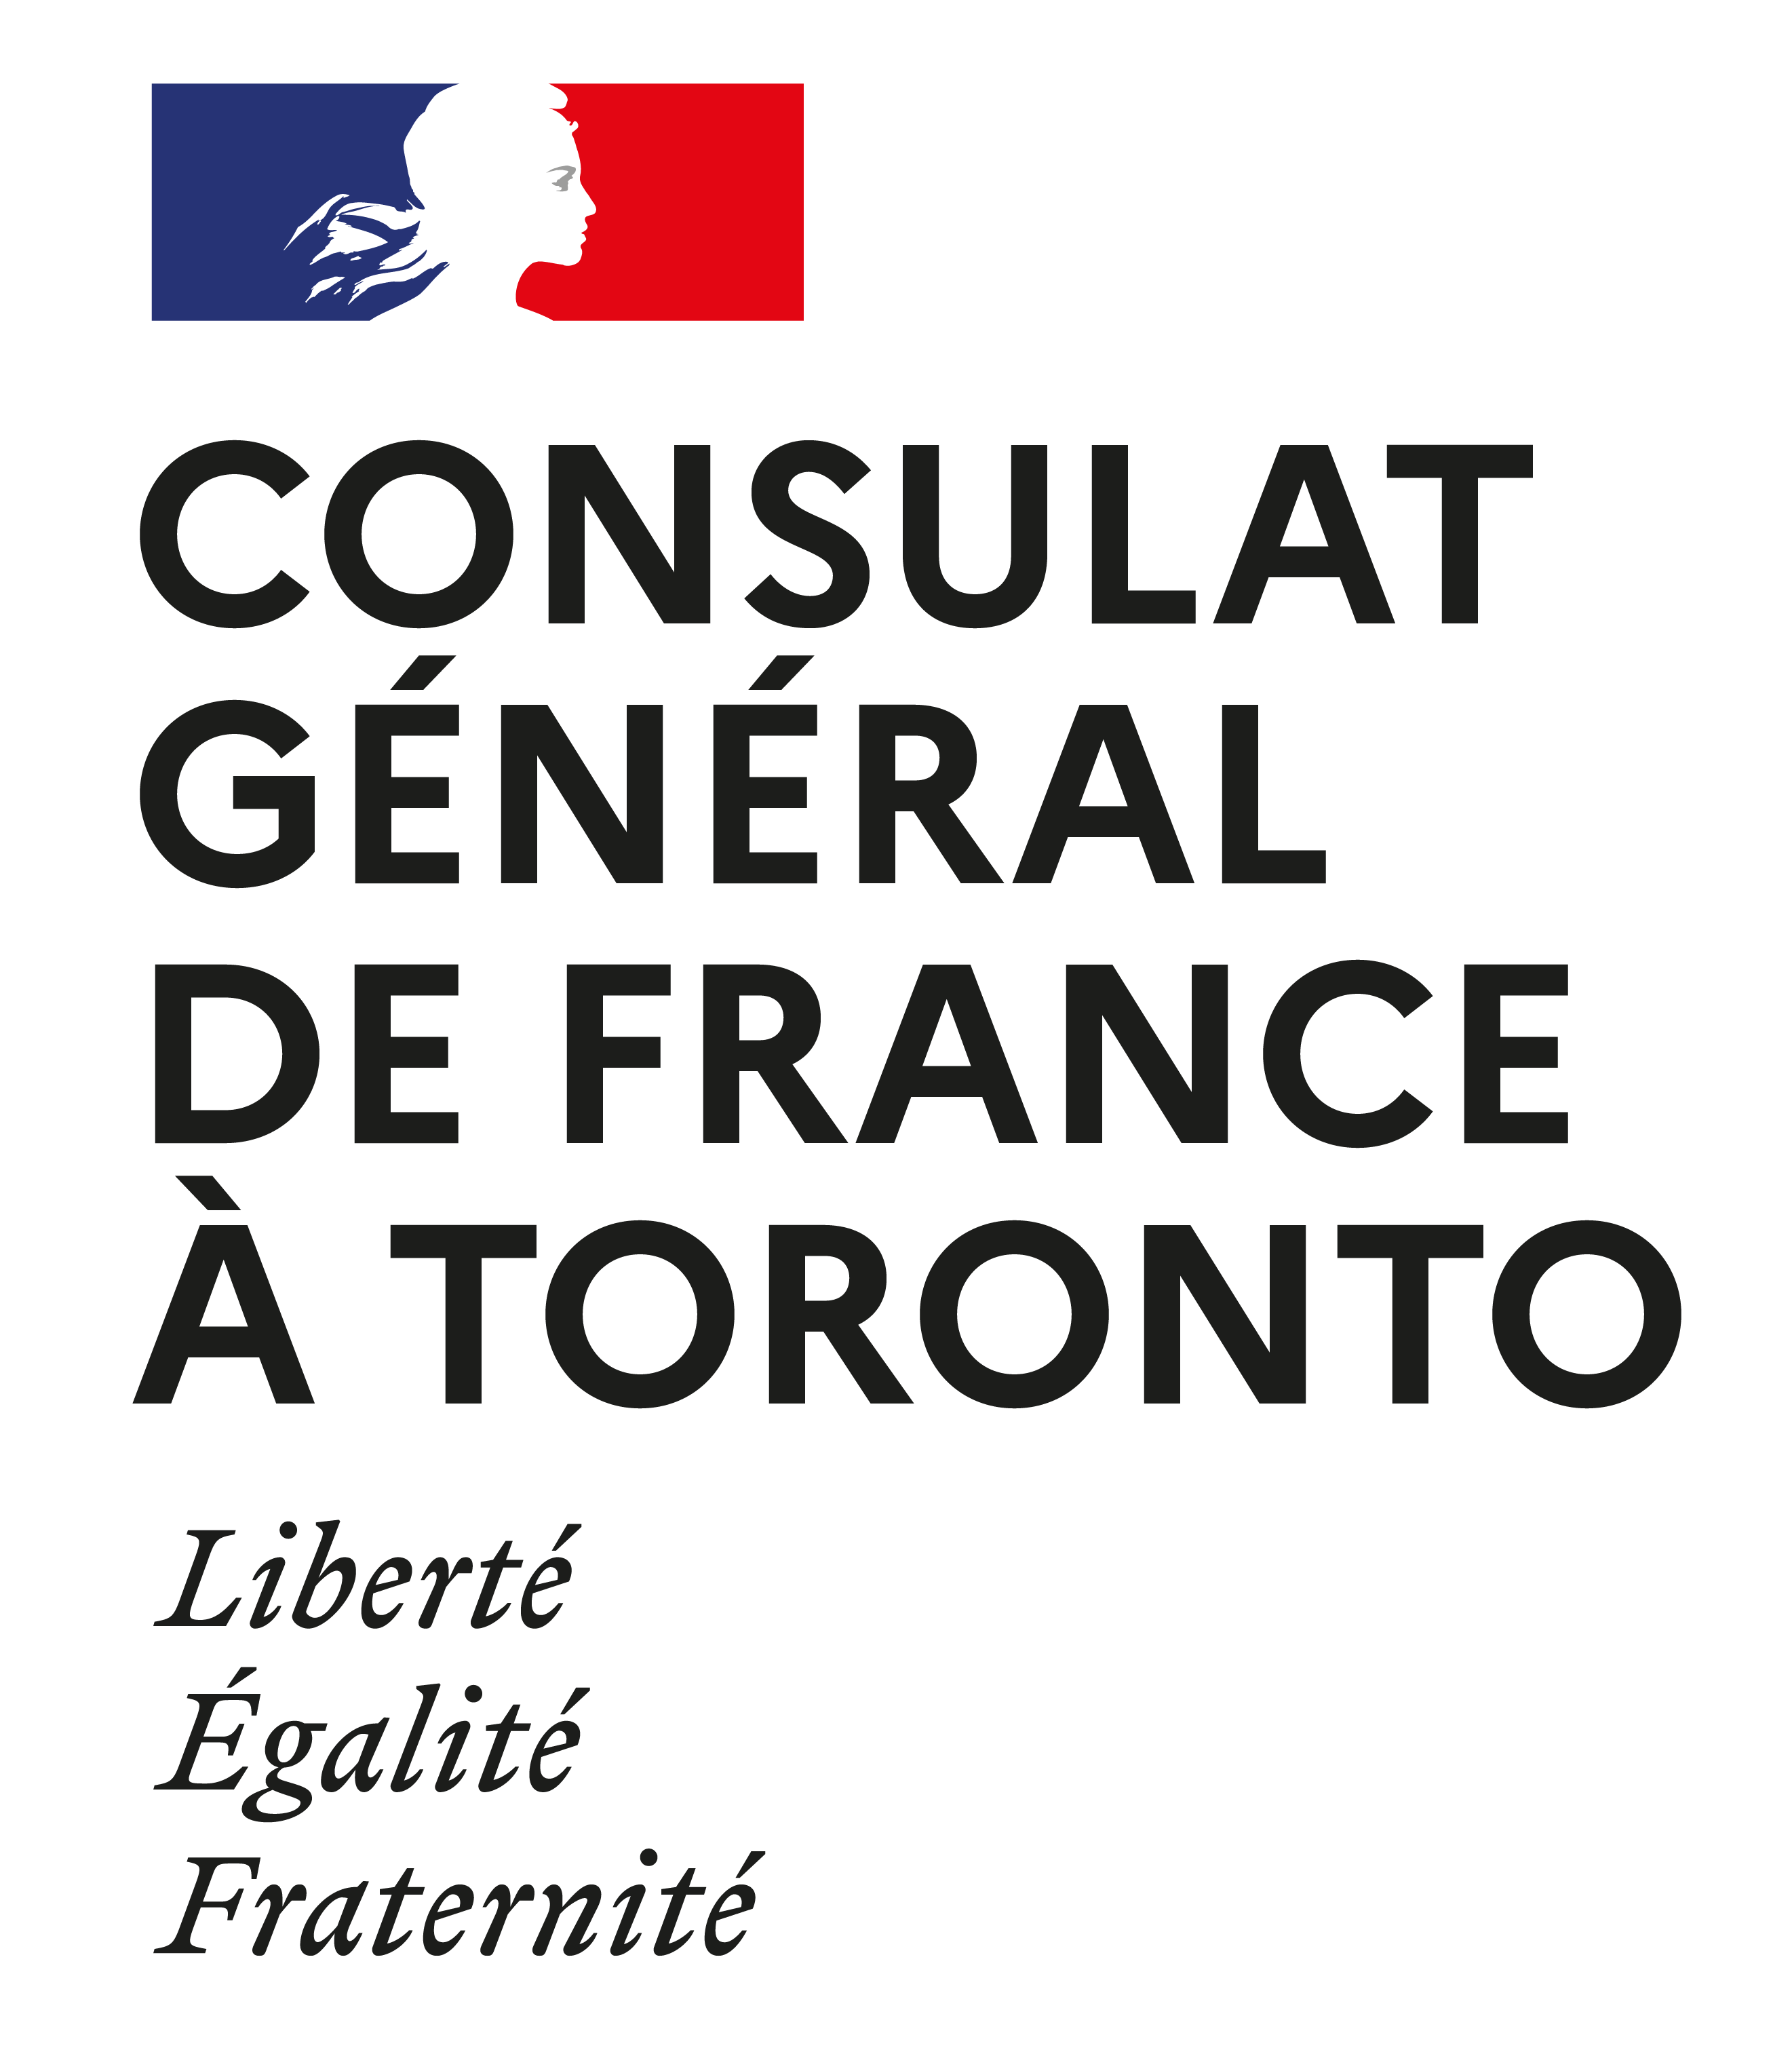 Consulate General of France in Toronto logo